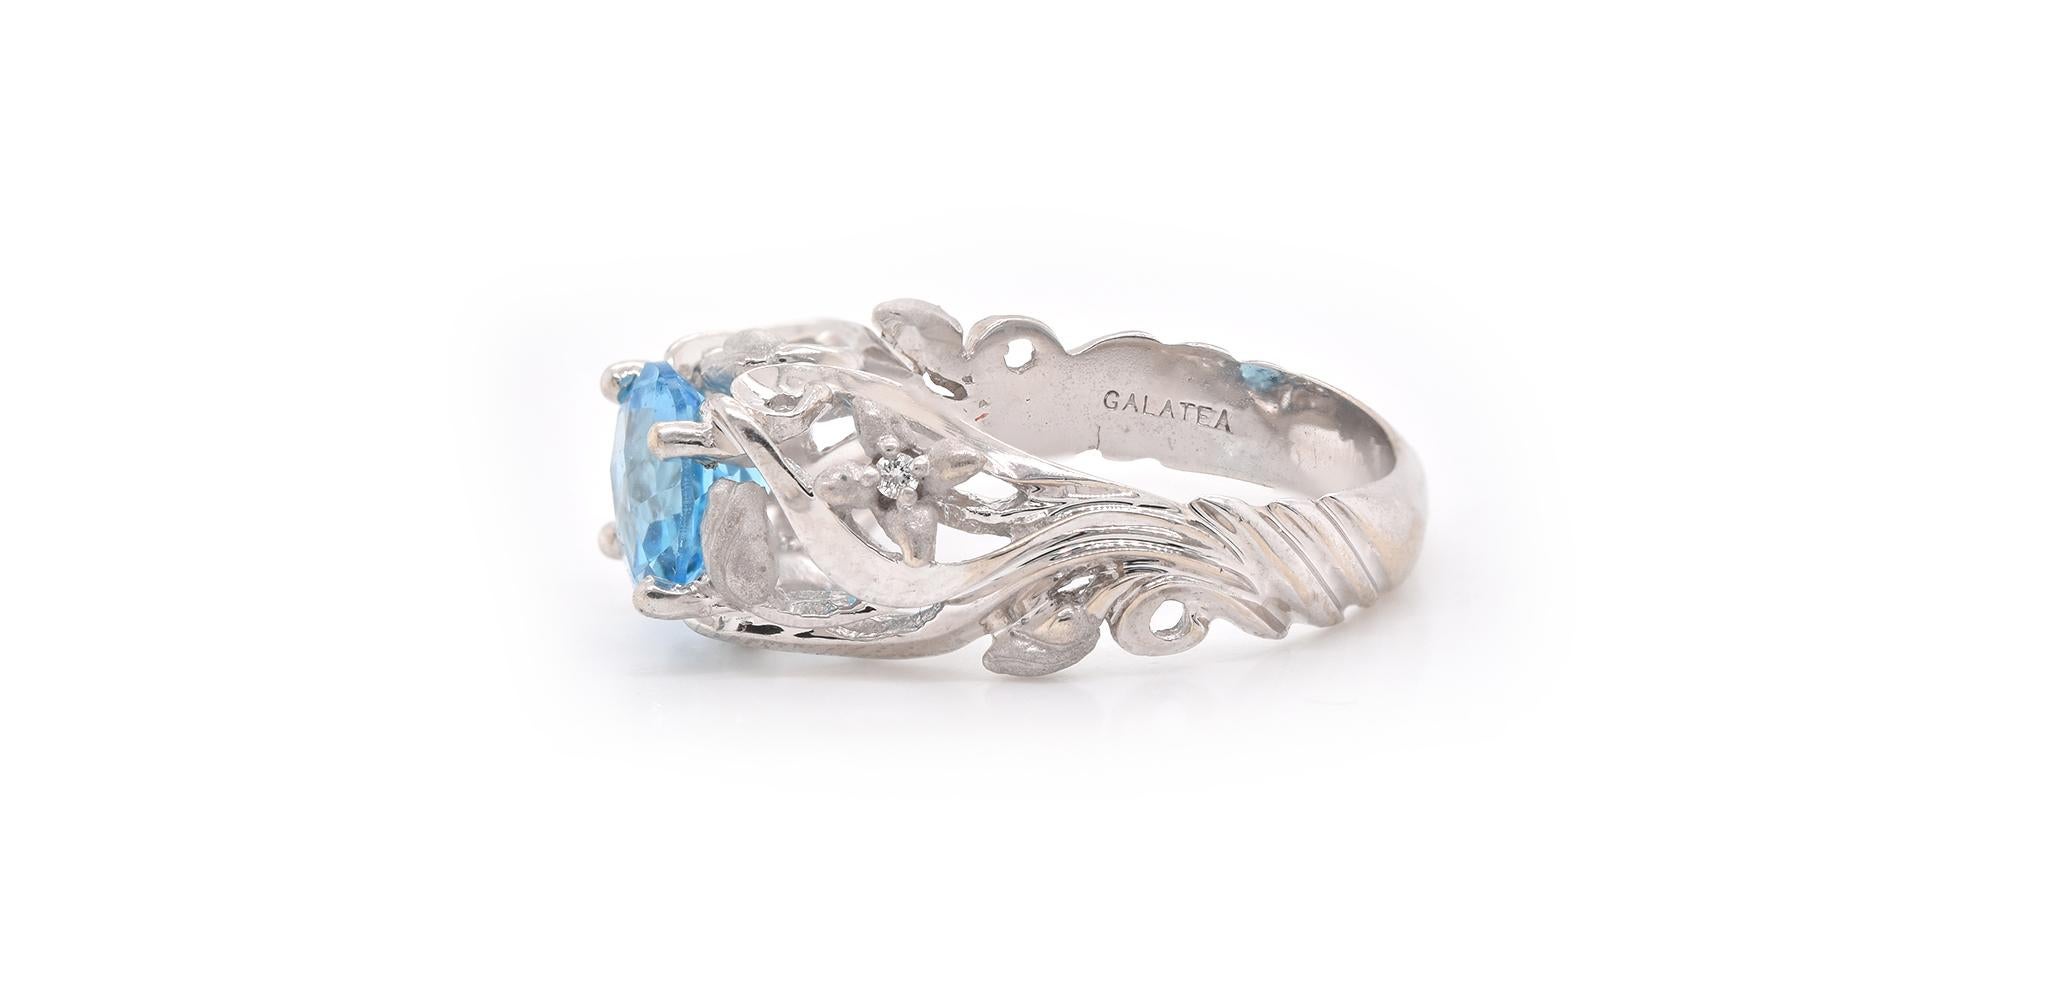 Material: 14k white gold
Topaz: Round faceted blue topaz
Ring size: 6 (please allow two additional shipping days for sizing requests)
Dimensions: Ring top measures 7.45mm – 9.60mm
Weight: 5.1 grams 
